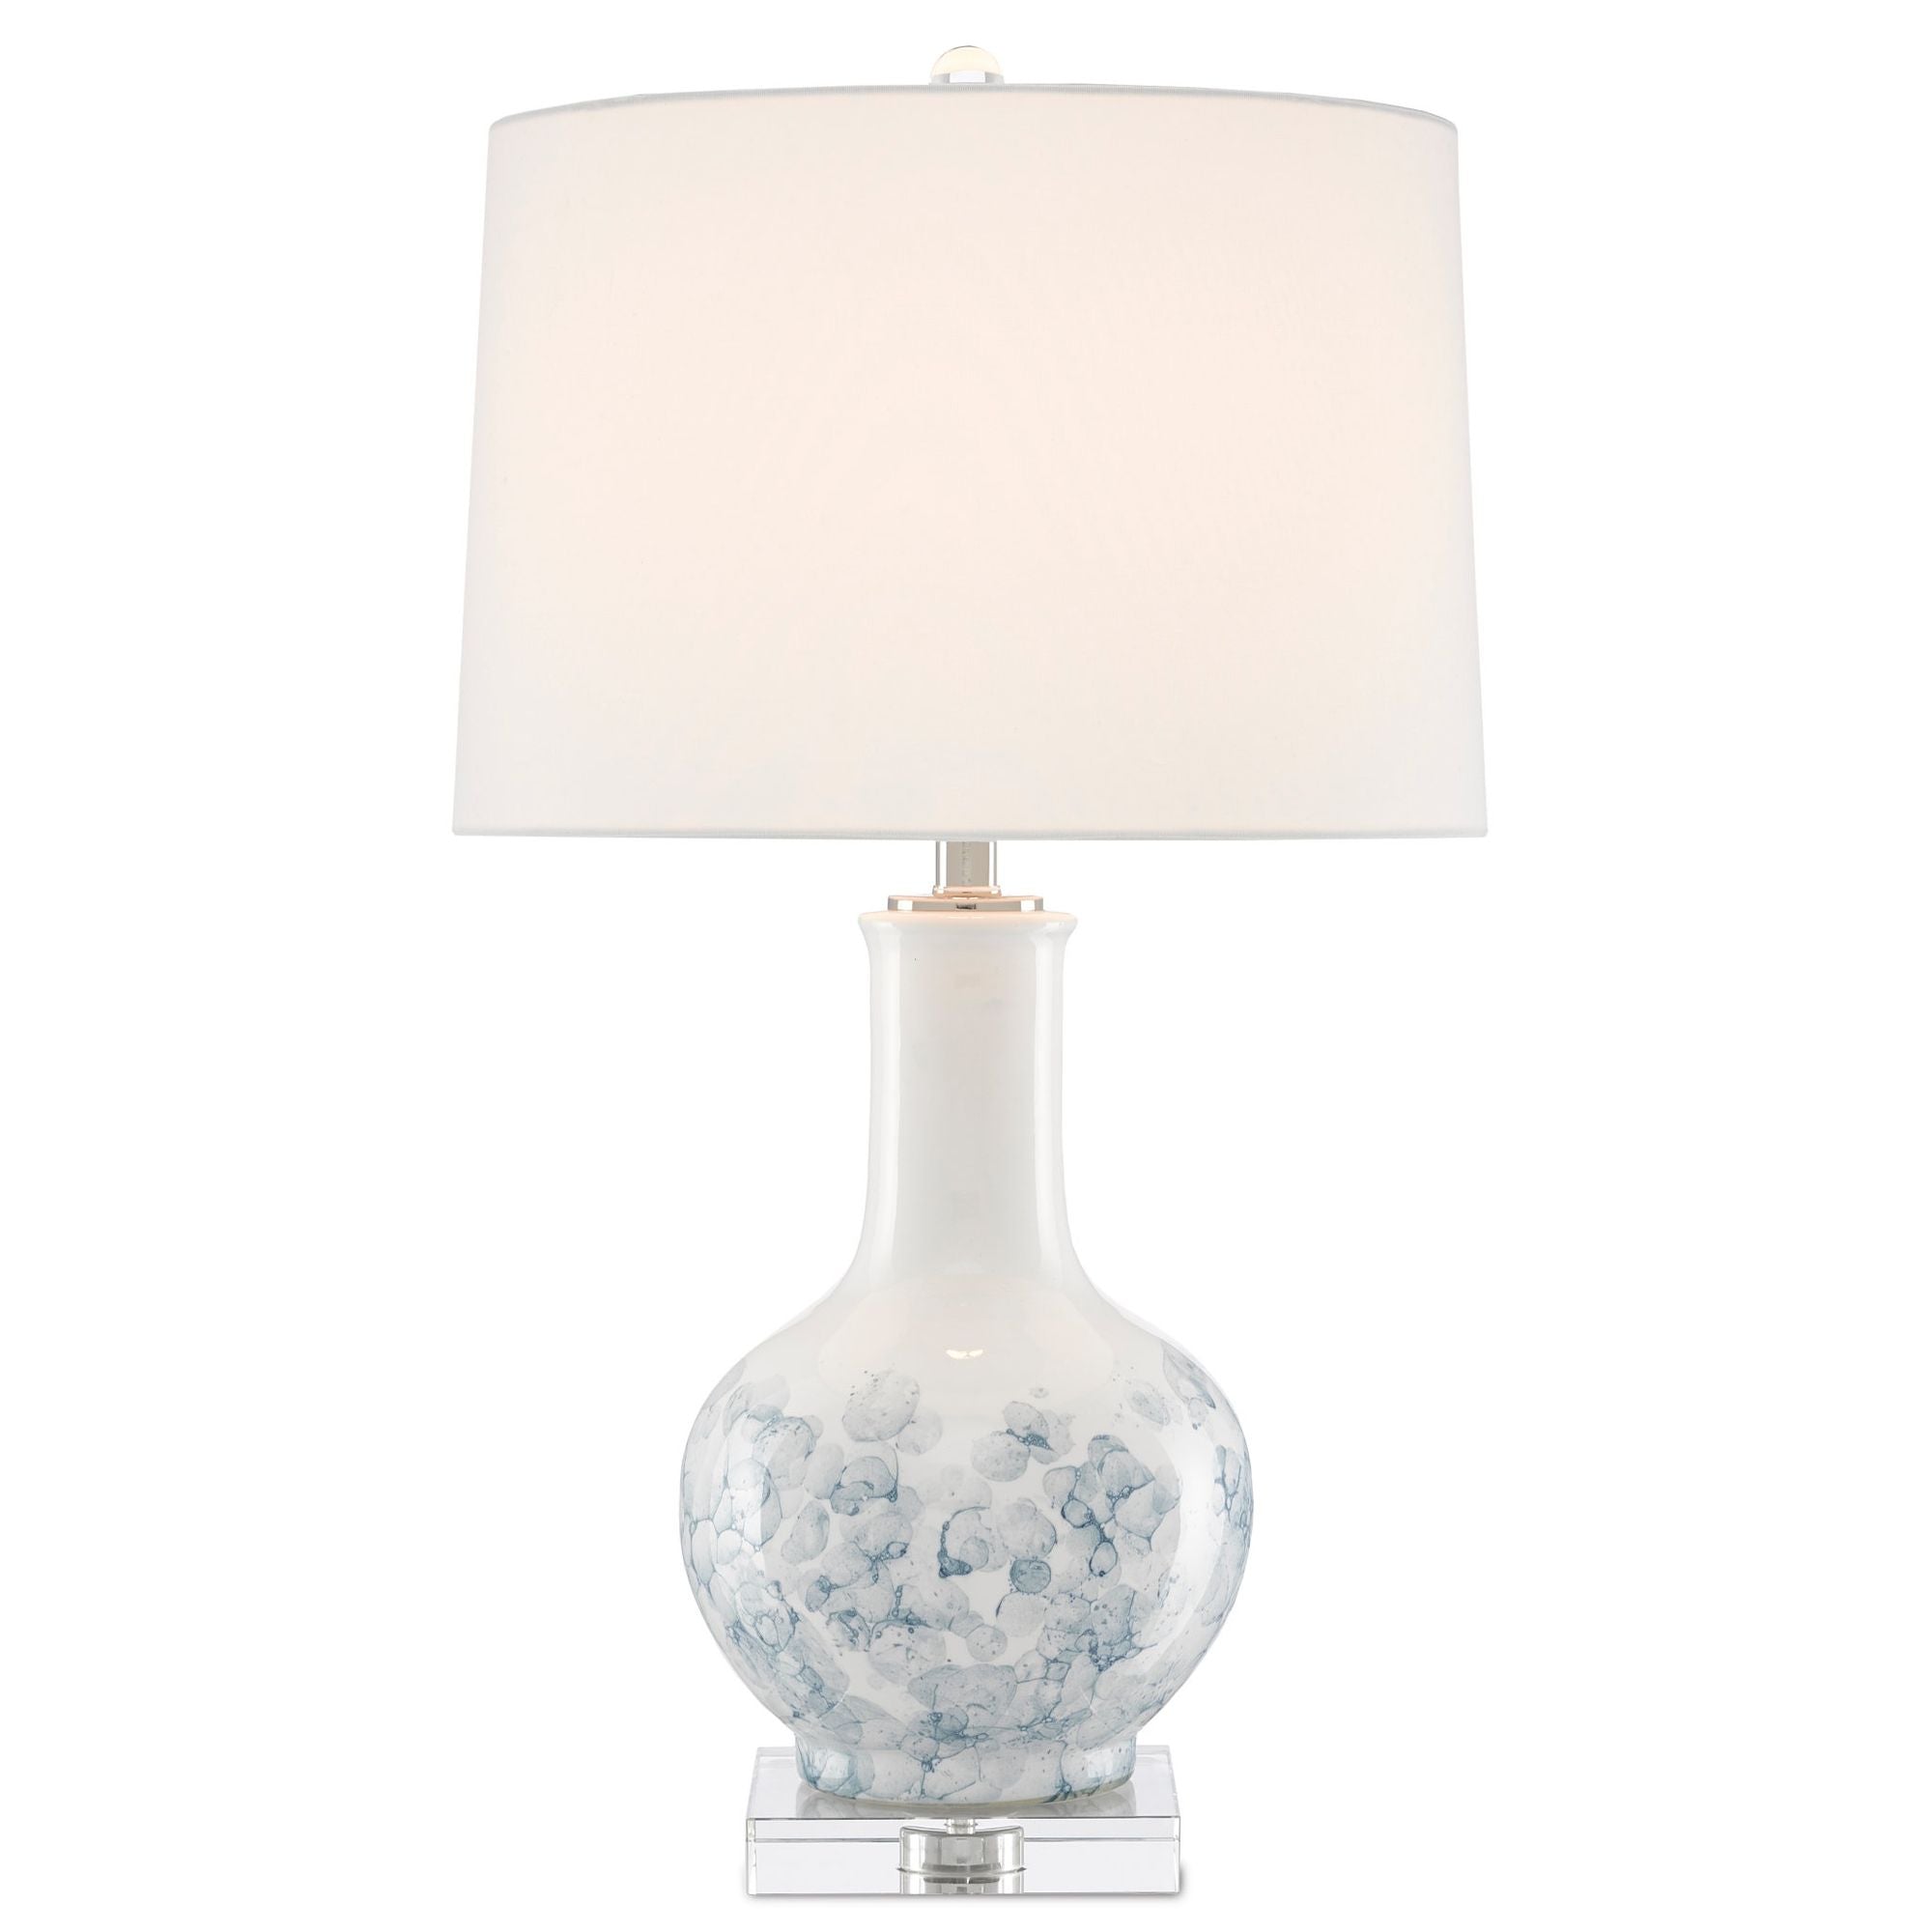 Myrtle White Table Lamp - White/Blue/Clear/Polished Nickel